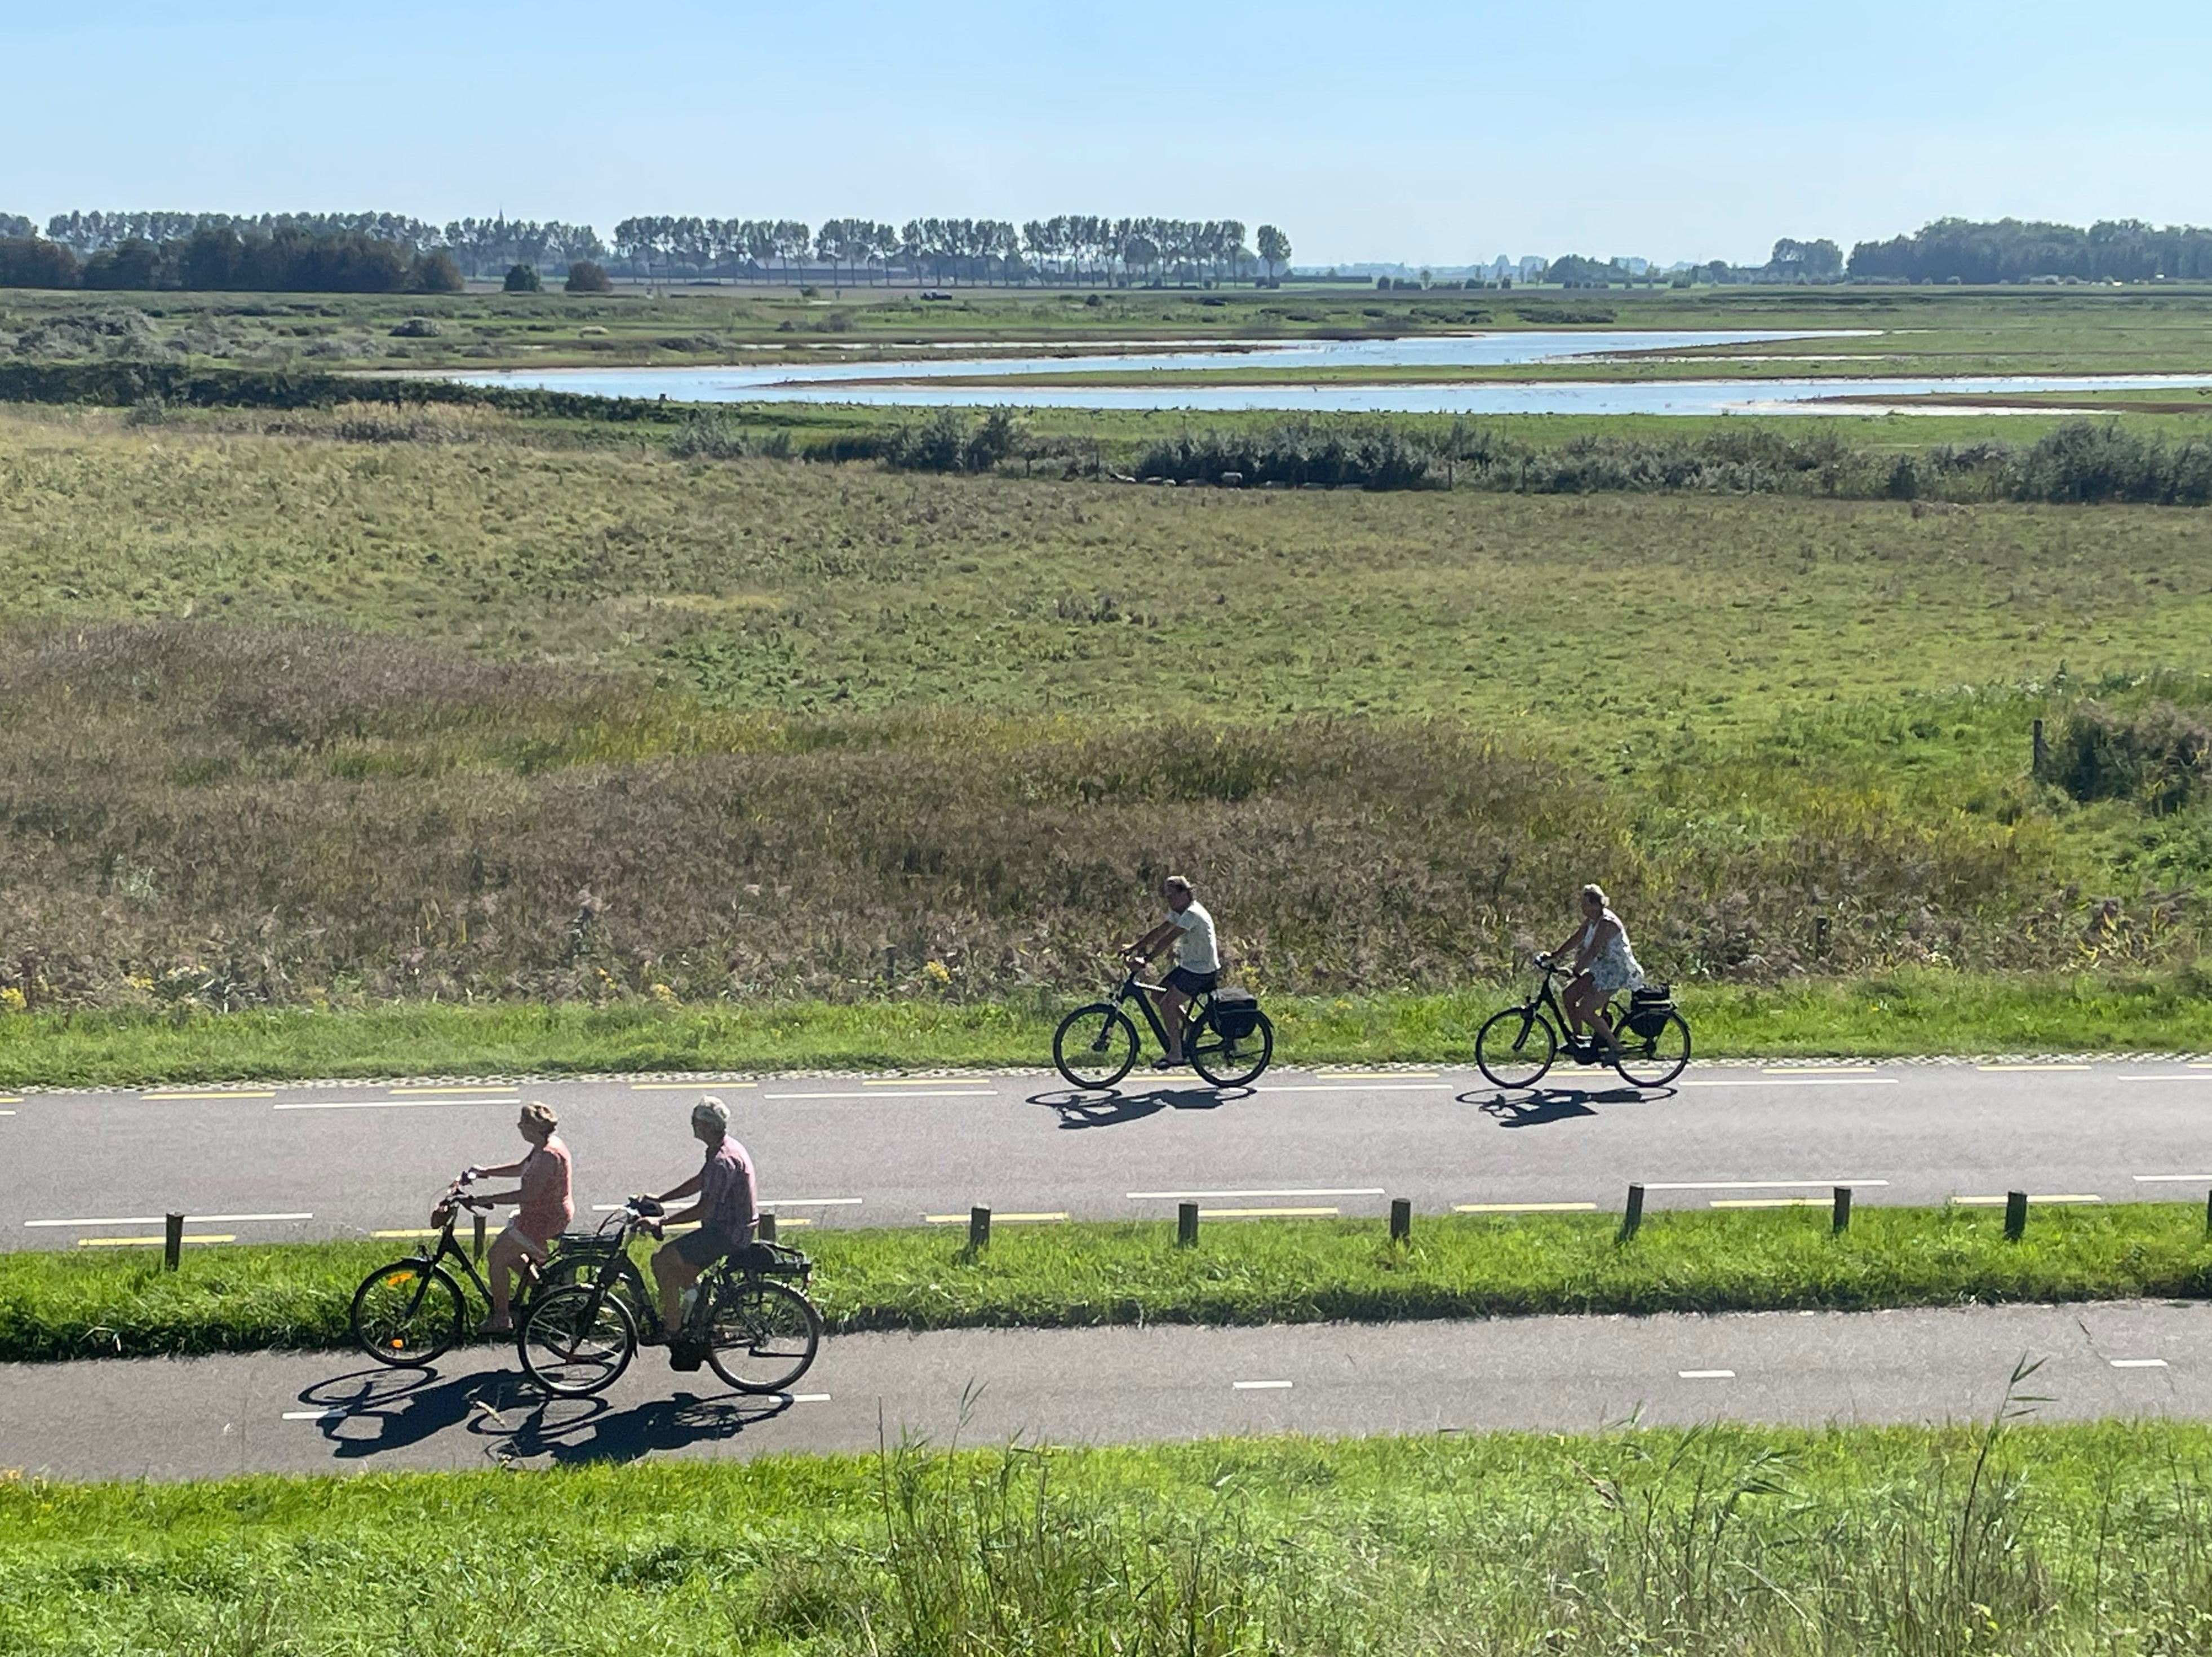 Taking the low road: Flat routes make this Dutch region a joy for relaxed cycling